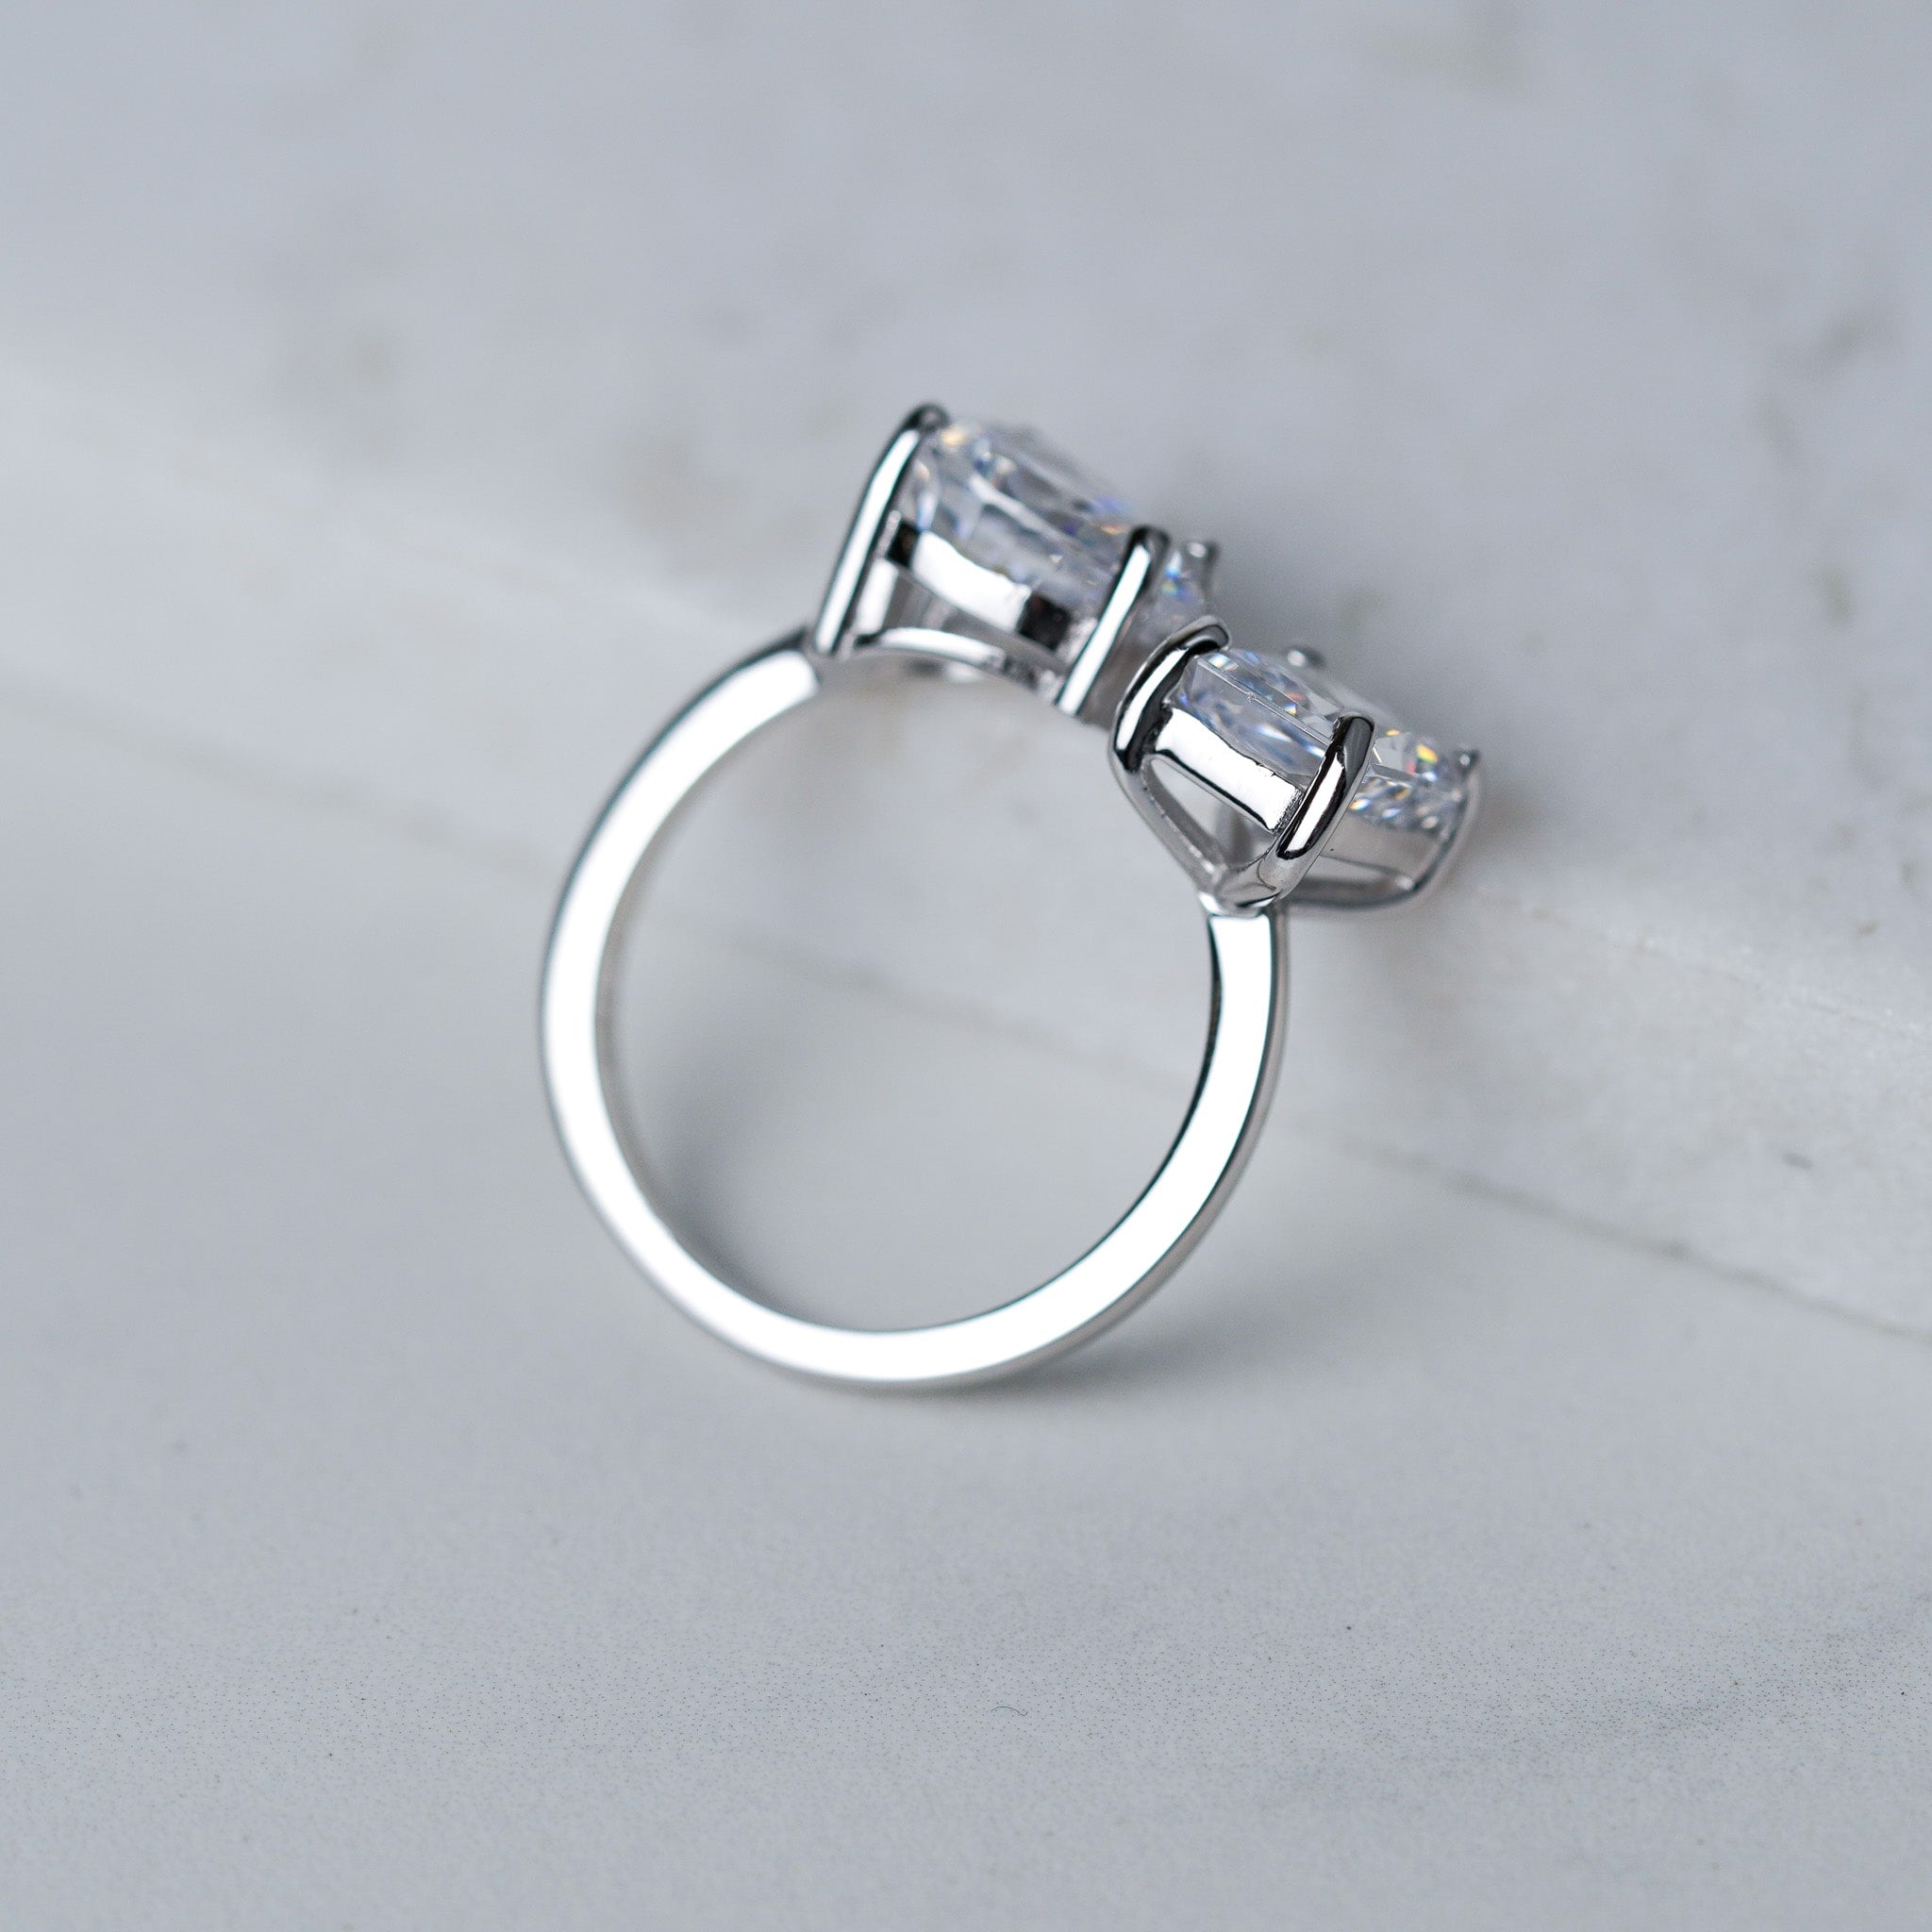 Adjustable Double Stone Ring - 5 ct